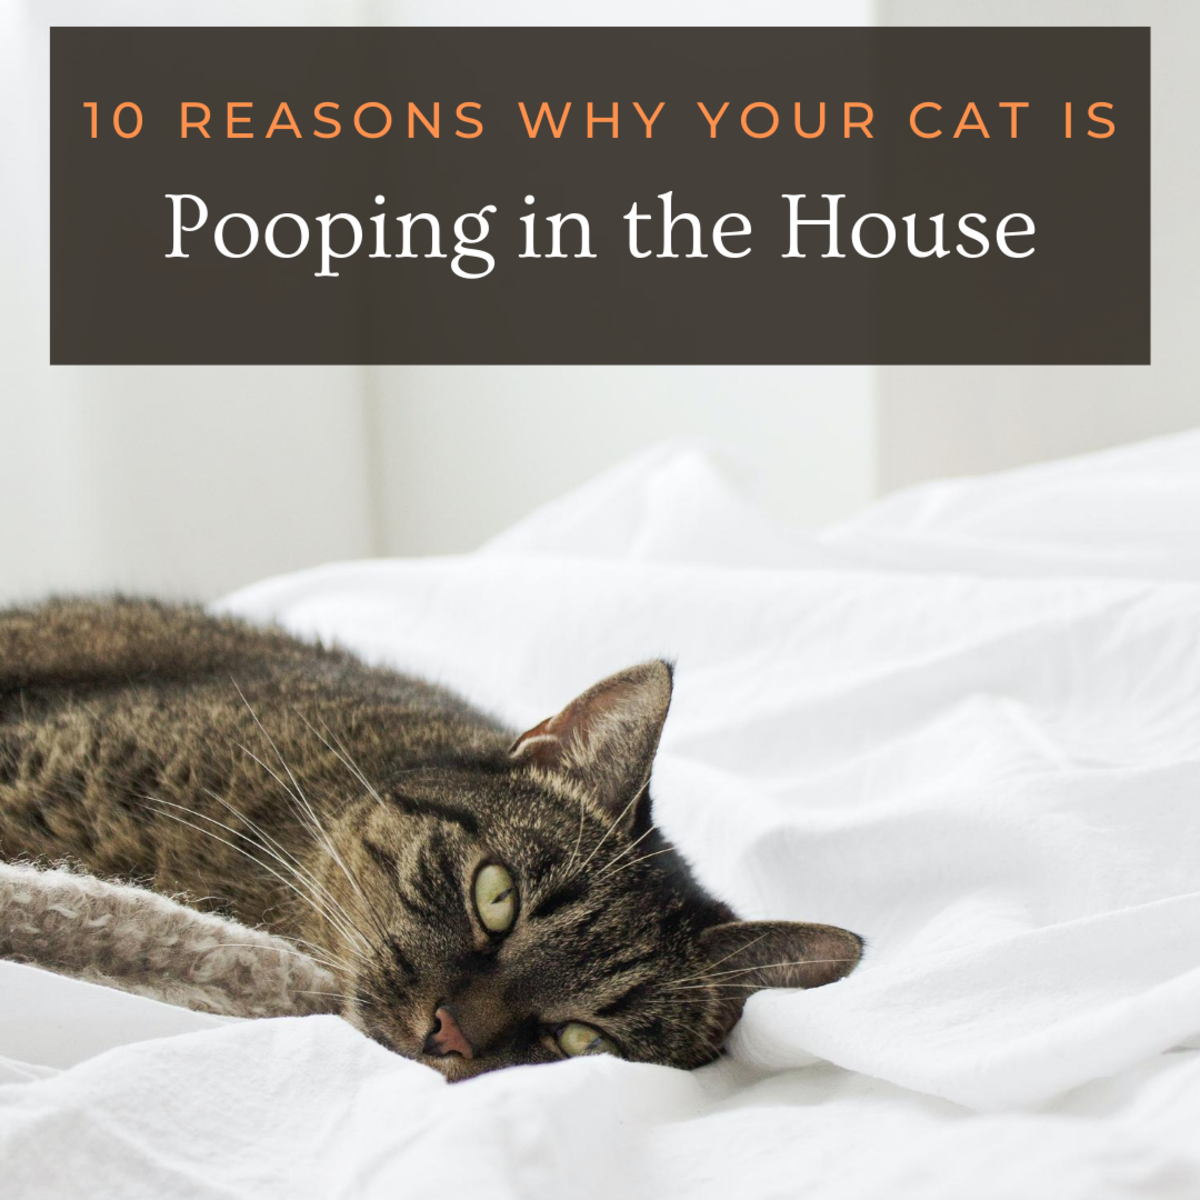 10 Reasons Why Cats Poop Outside the Litter Box